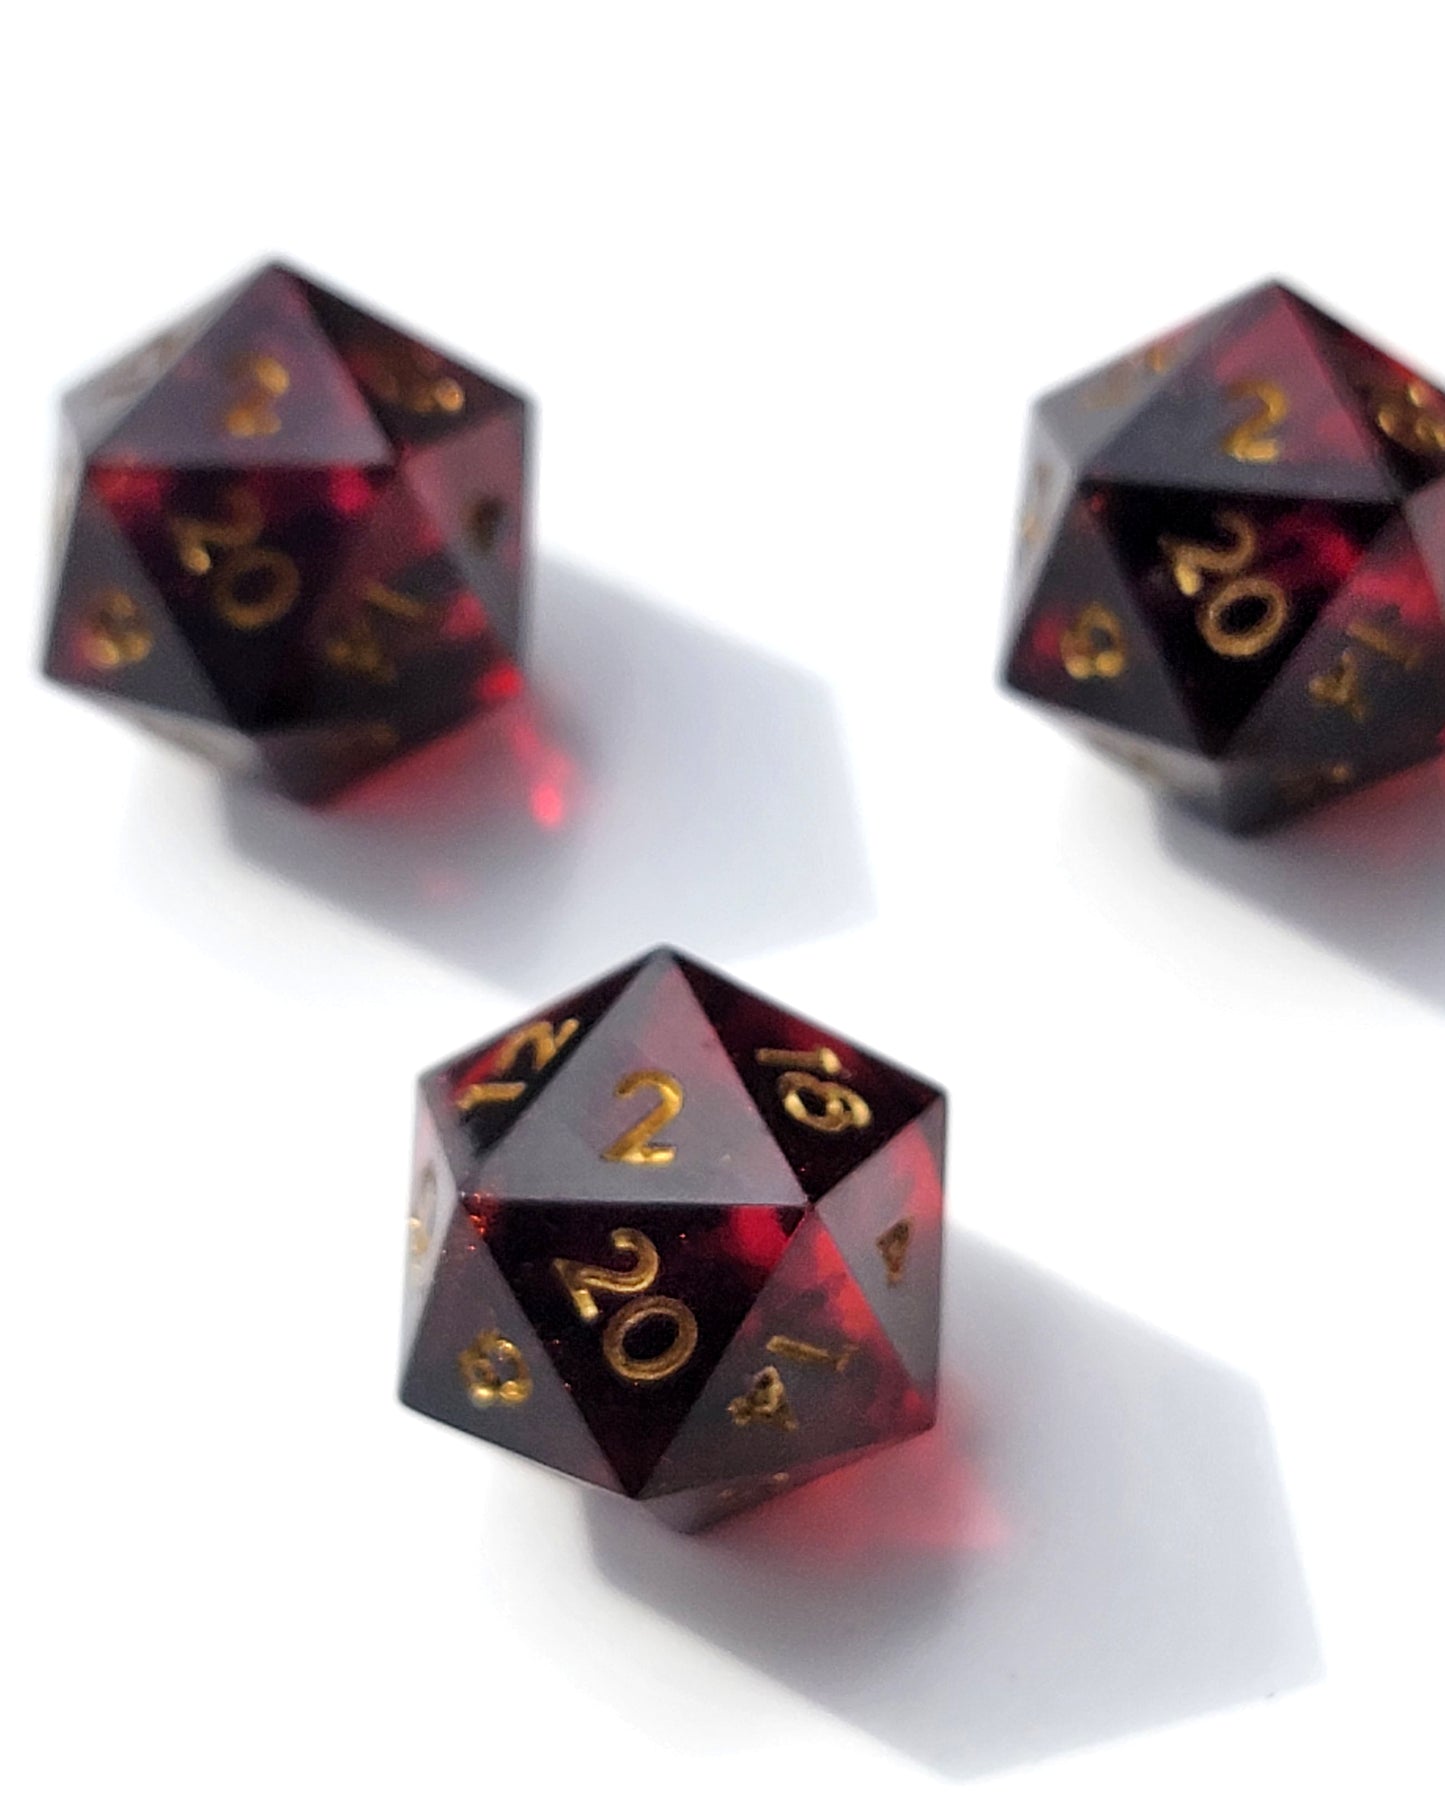 Tears of Wrath - D20 D&D Dice| Hand Crafted Dungeons and Dragons Dice